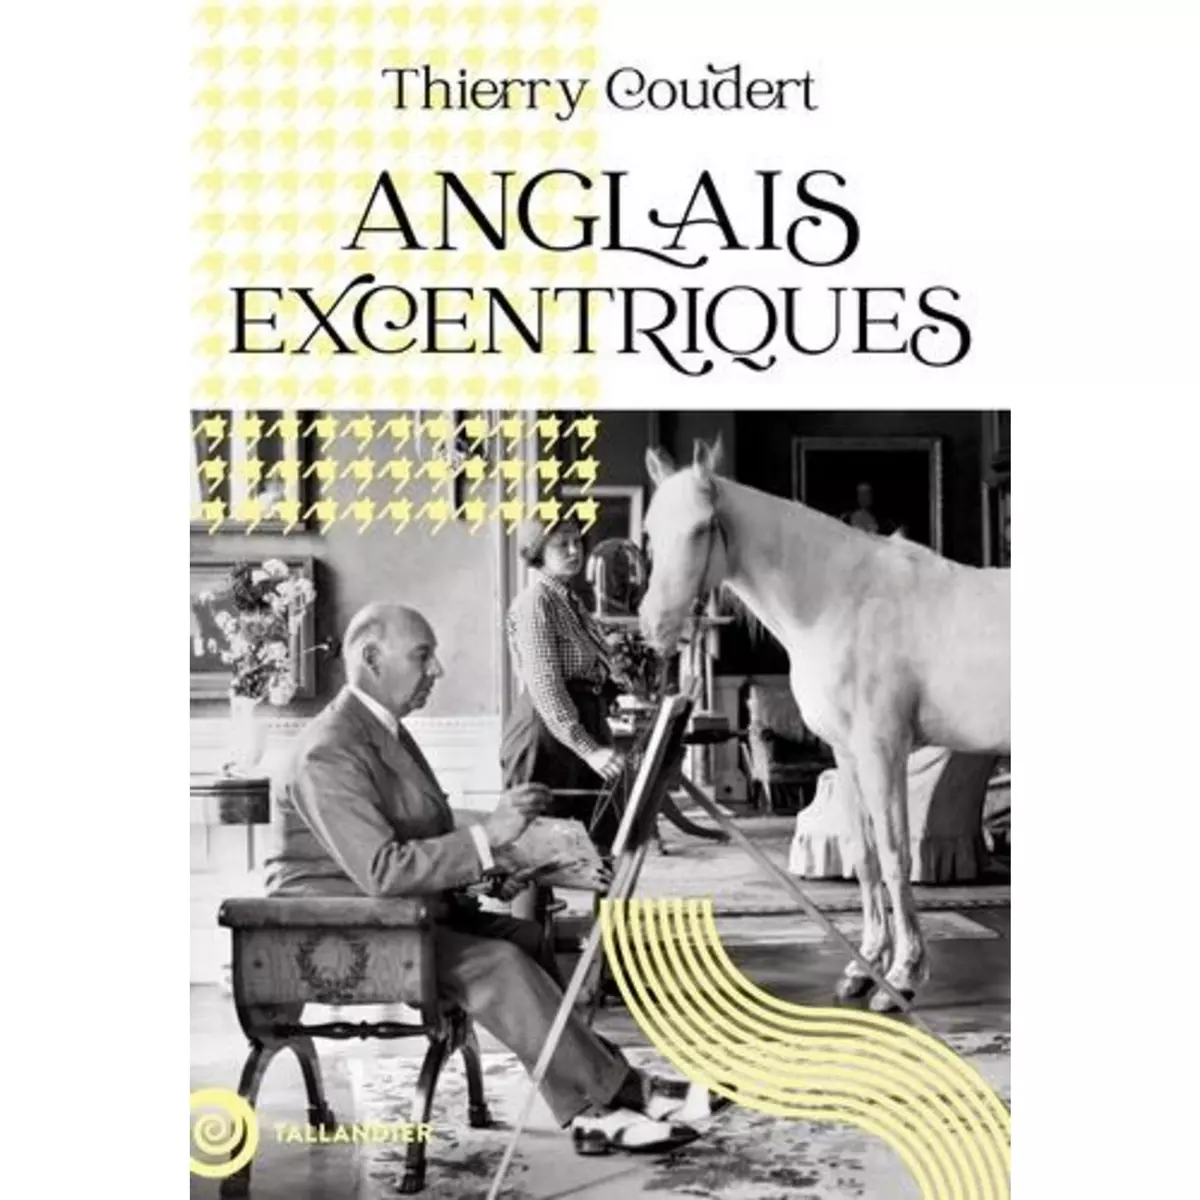  ANGLAIS EXCENTRIQUES, Coudert Thierry